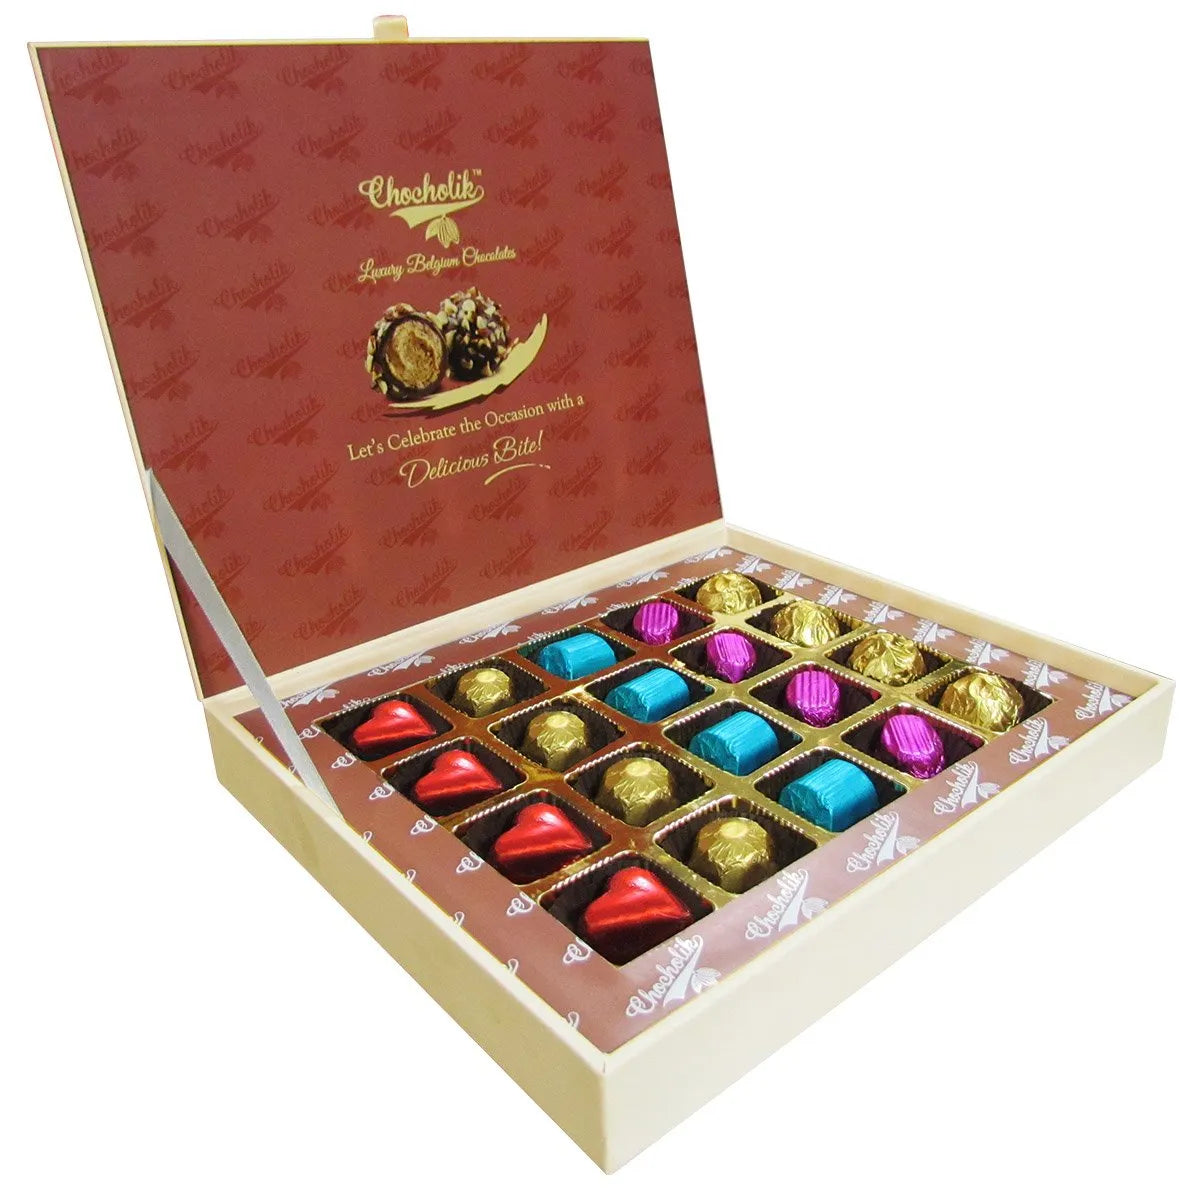 Anniversary Chocolate: Gift/Send Addons Gifts Online J11140845 |IGP.com